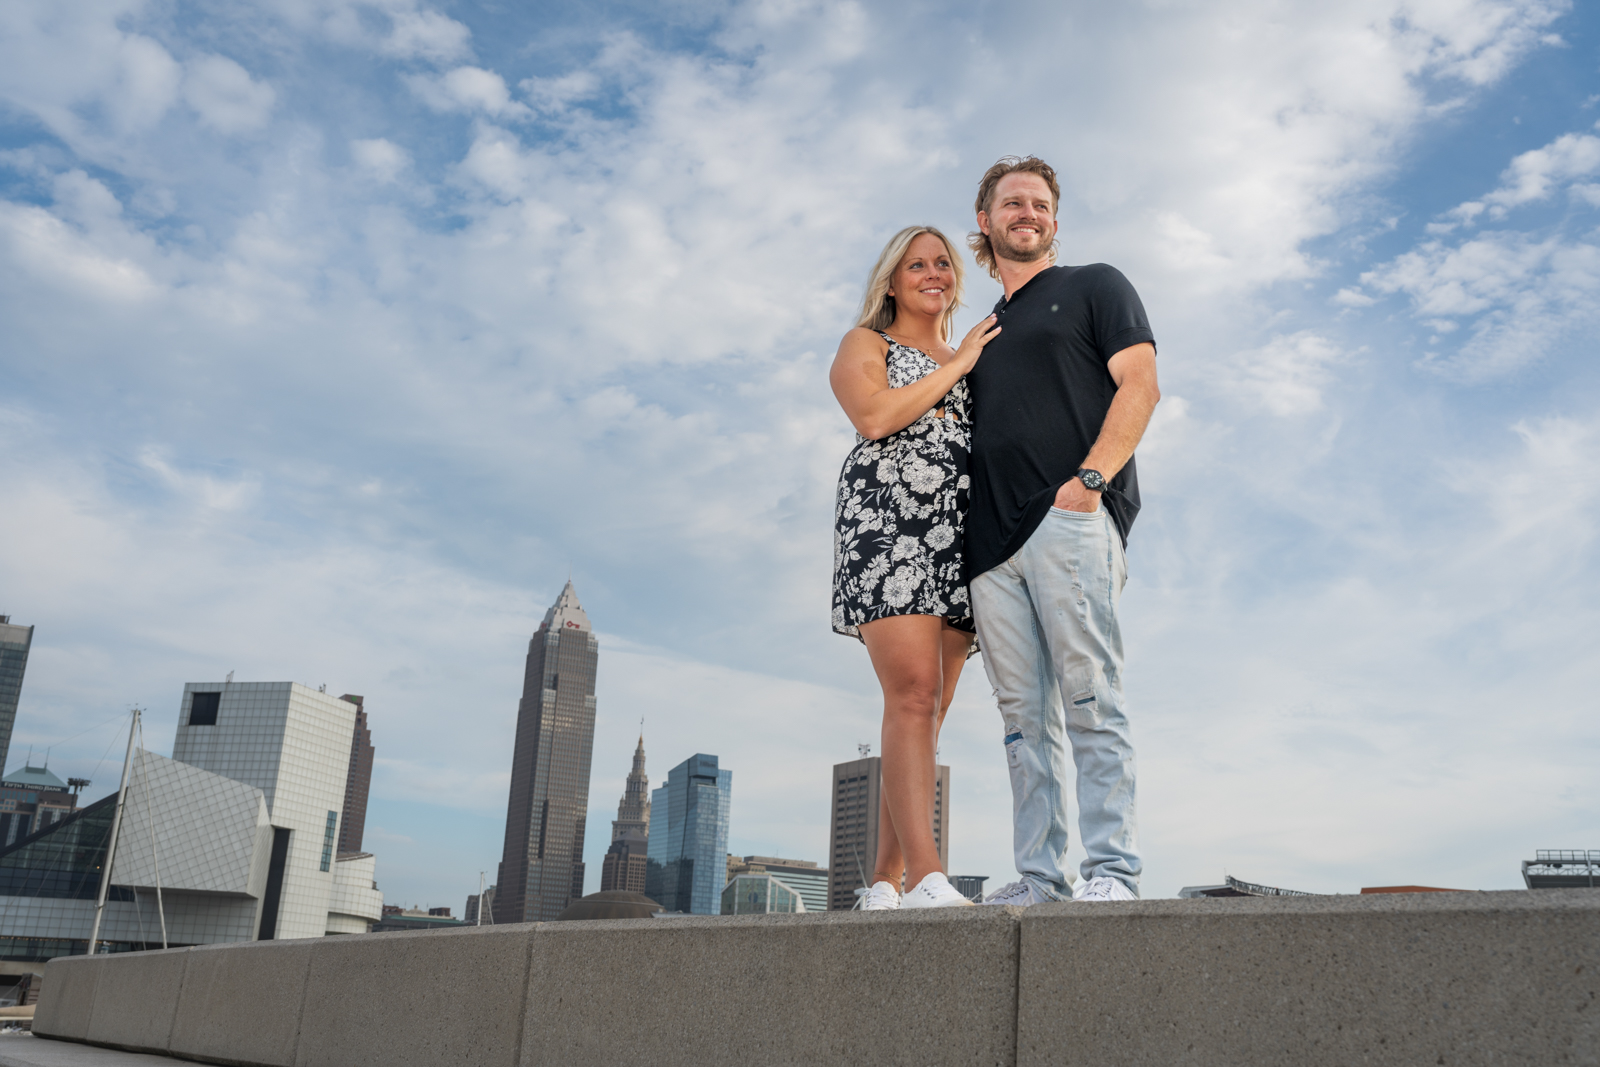 Megan + Kevin Engagement Session at Voinovich Park in Cleveland, Ohio